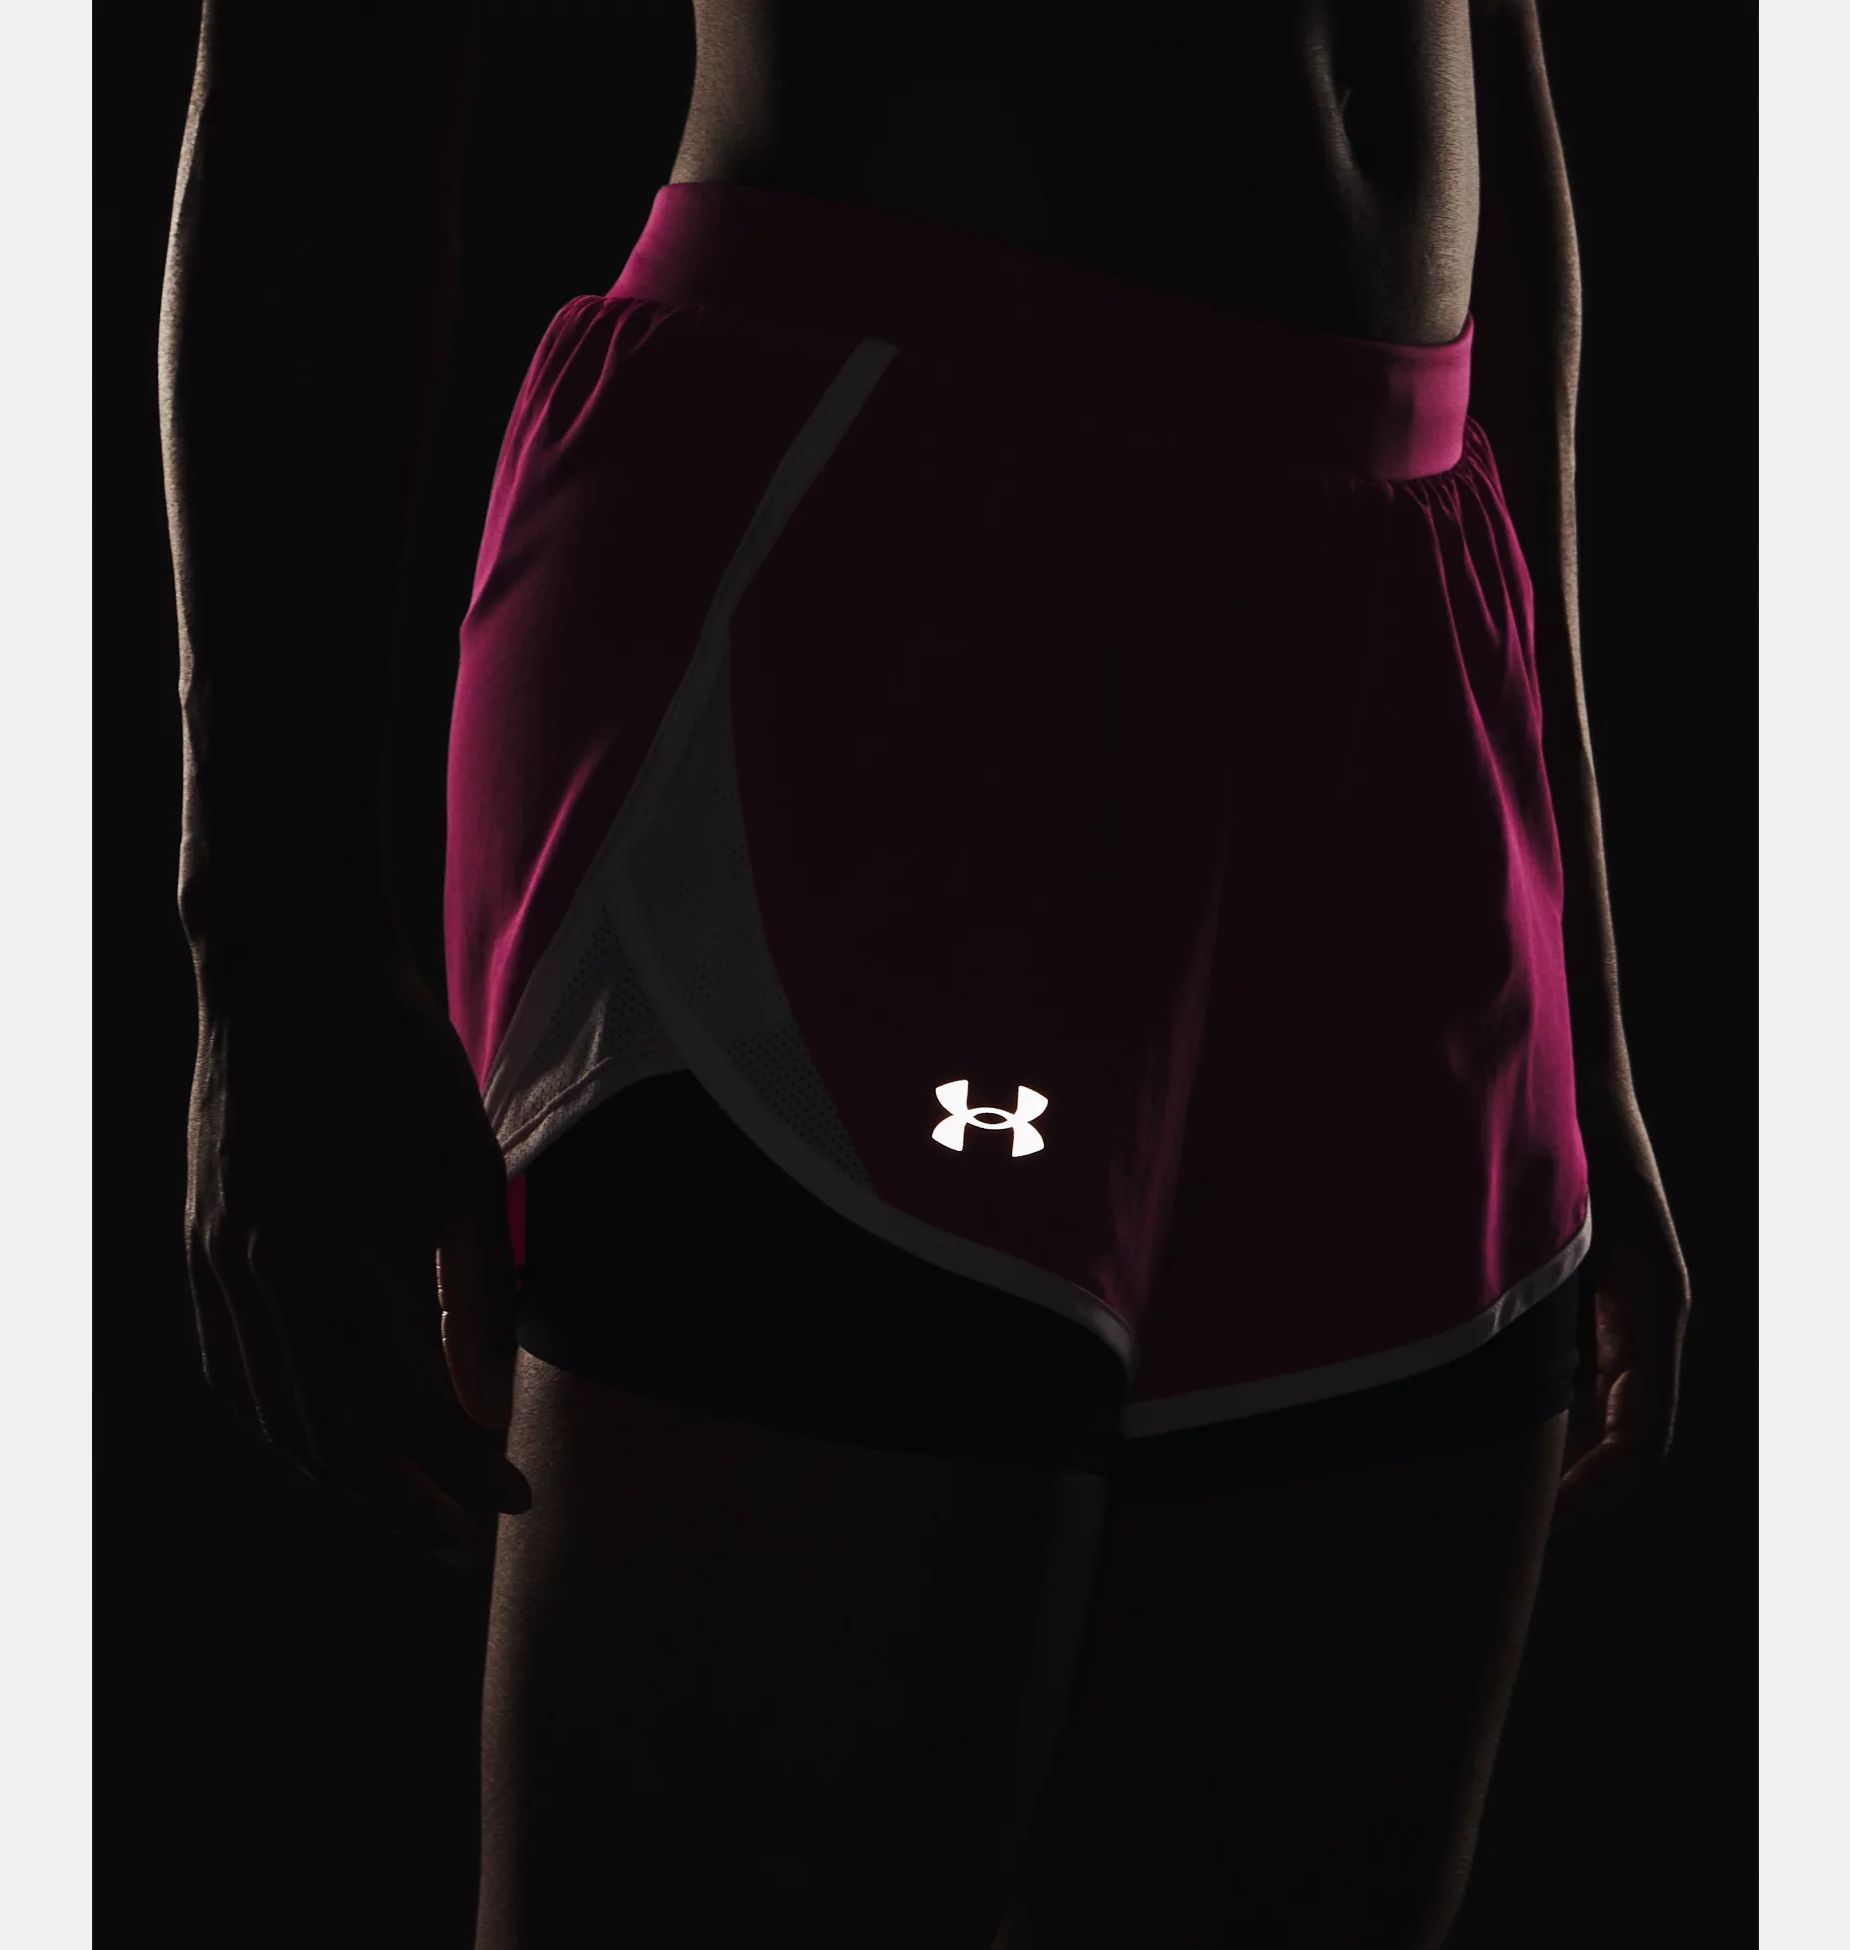 Shorts -  under armour UA Fly By 2.0 2 in 1 Shorts